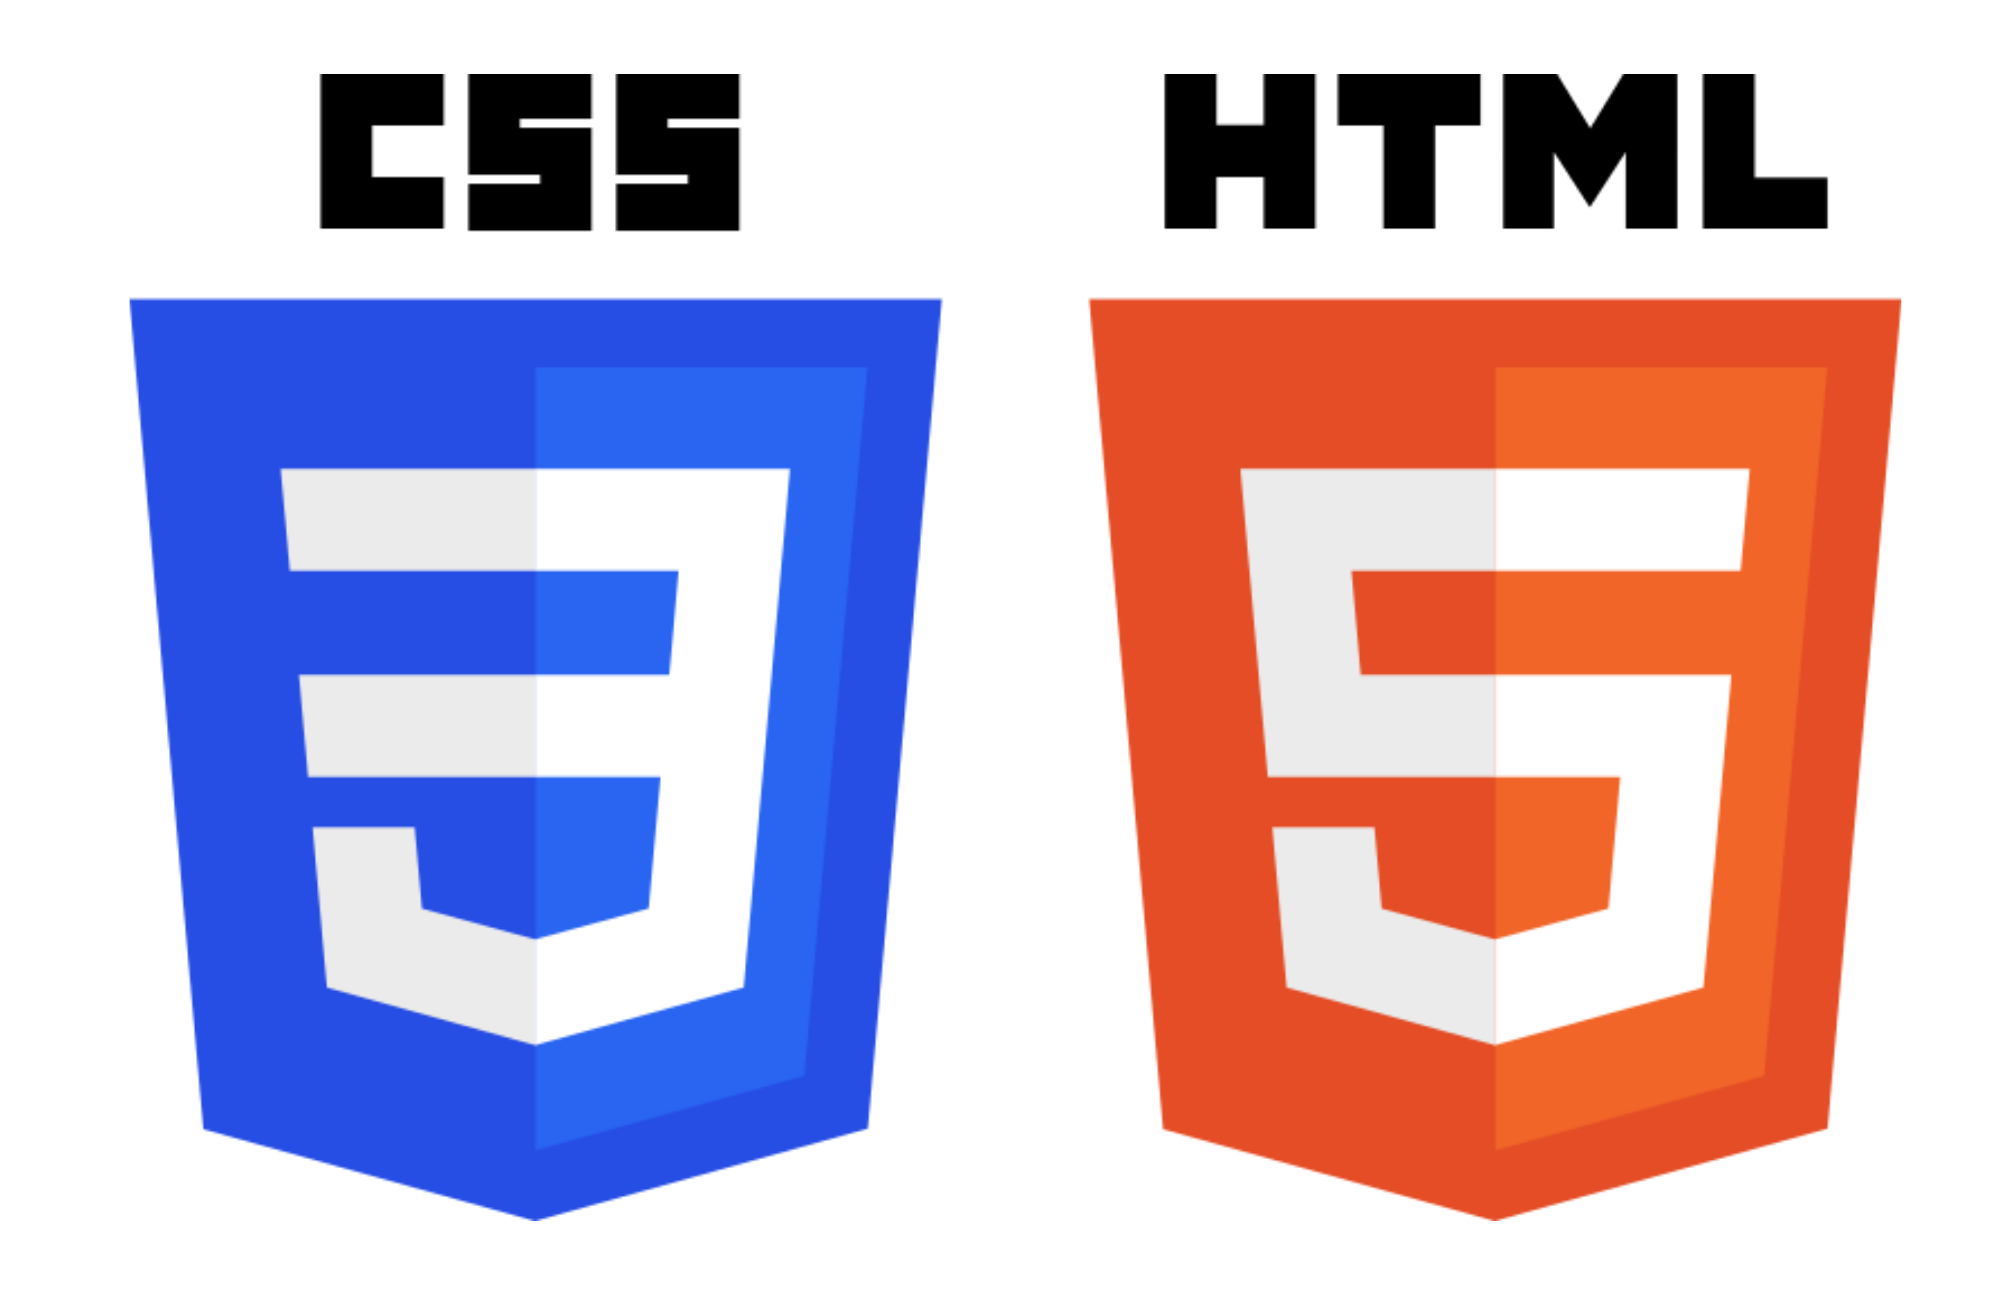 An HTML5 and CSS3 logo